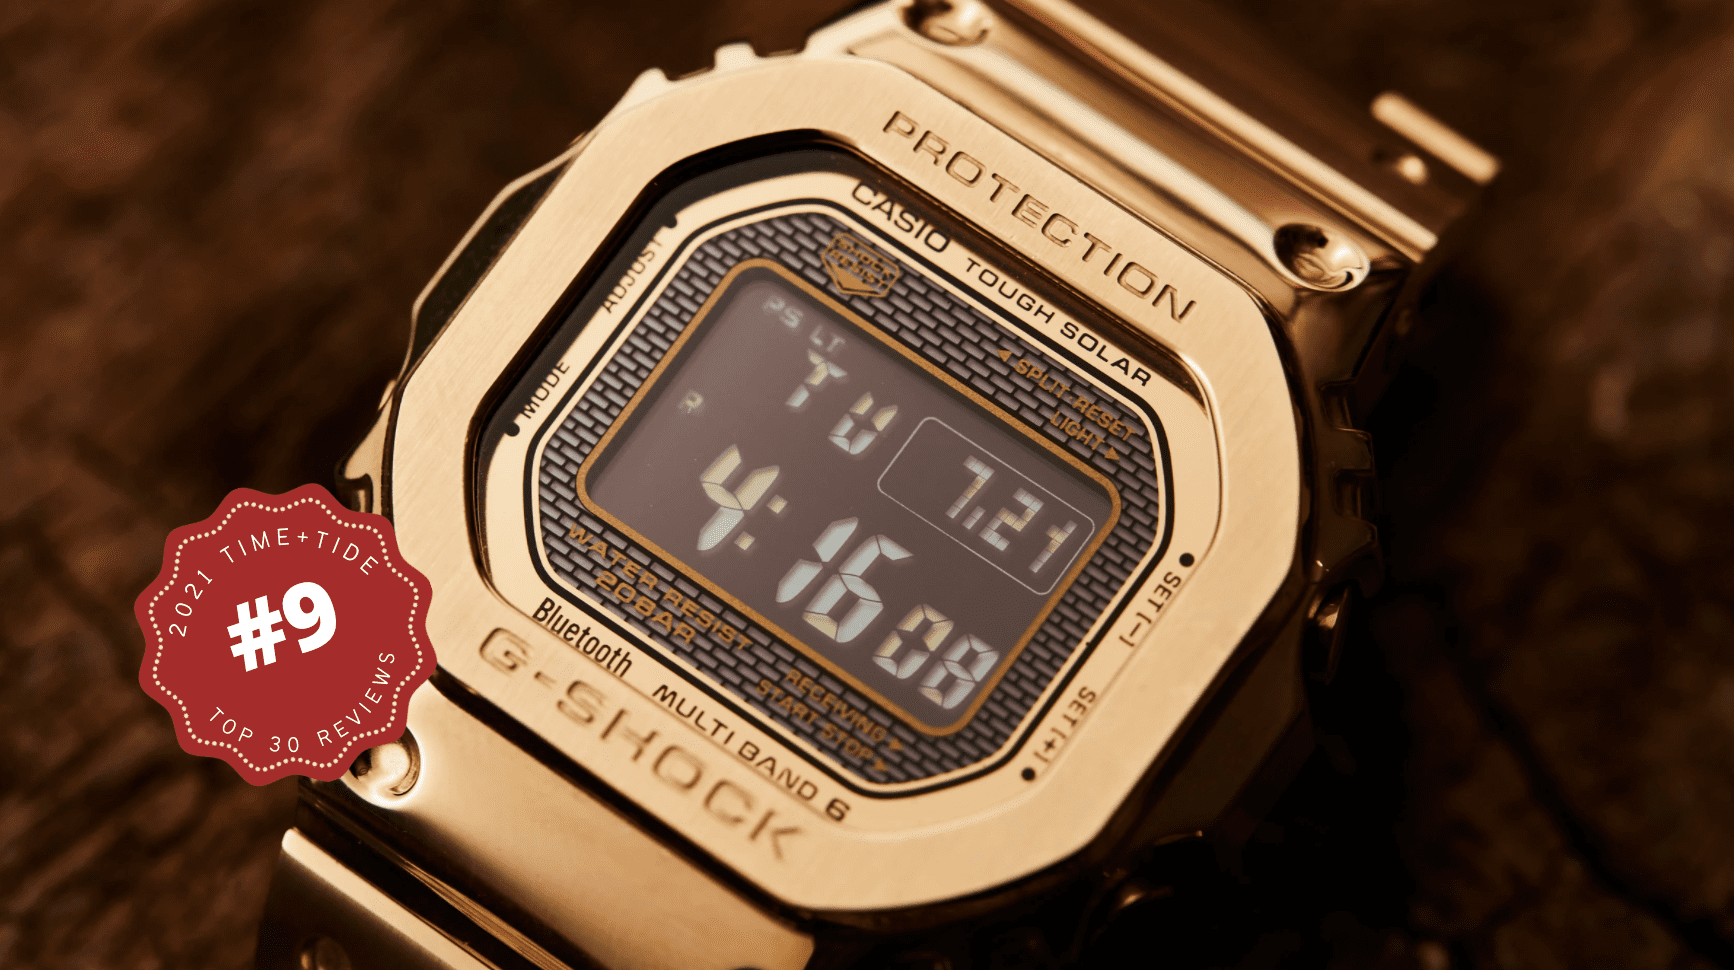 THE TOP WATCH REVIEWS OF 2021 – The Casio G-Shock Full Metal GMW-B5000GD-9 (#9)